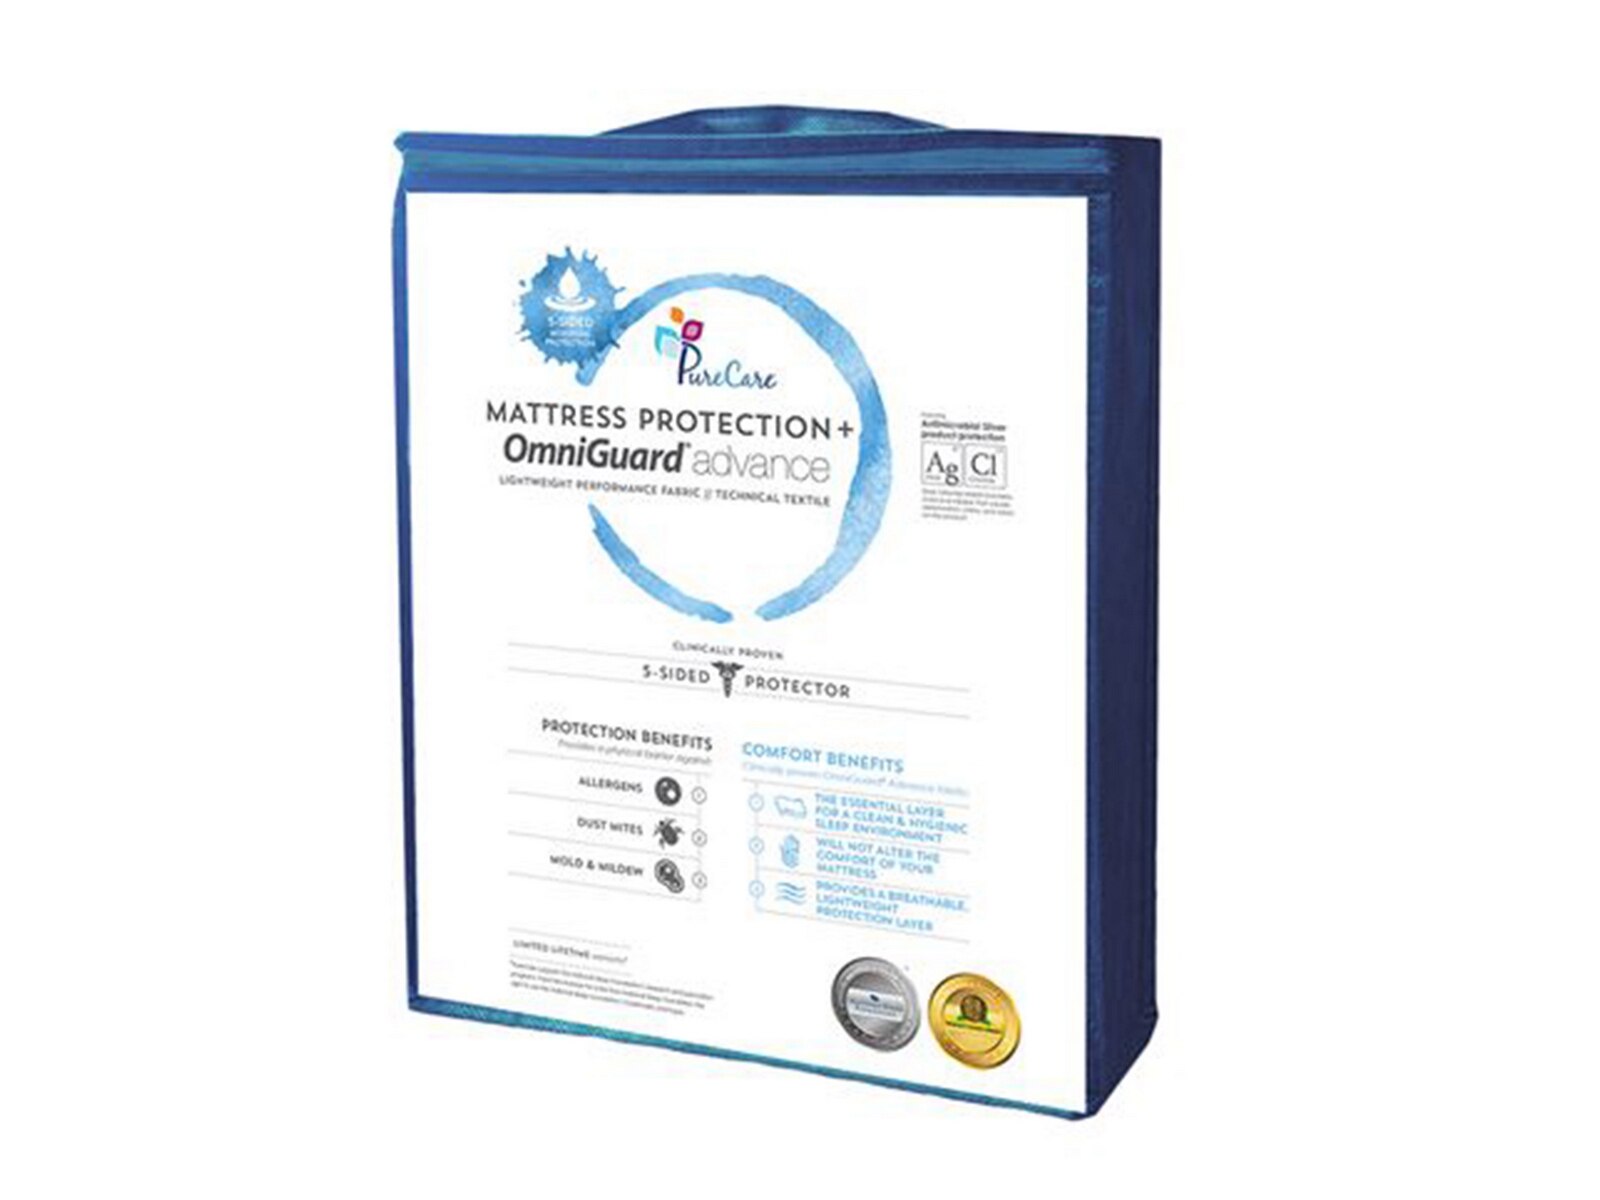 5 sided purecare antibacterial silver mattress protector